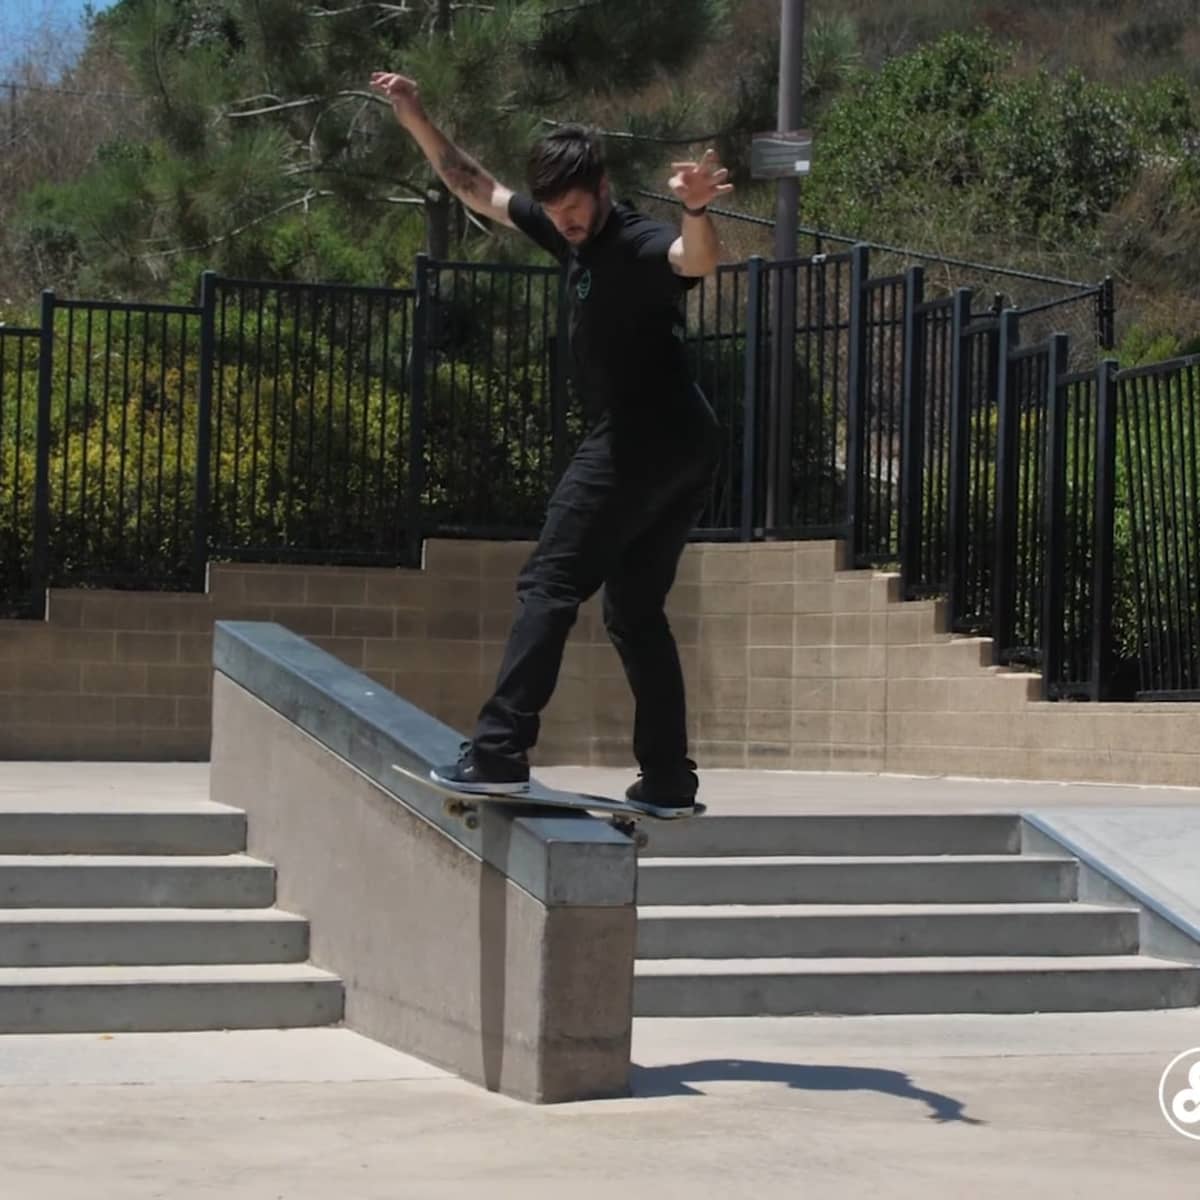 How to lock in perfect frontside boardslides [video tutorial]